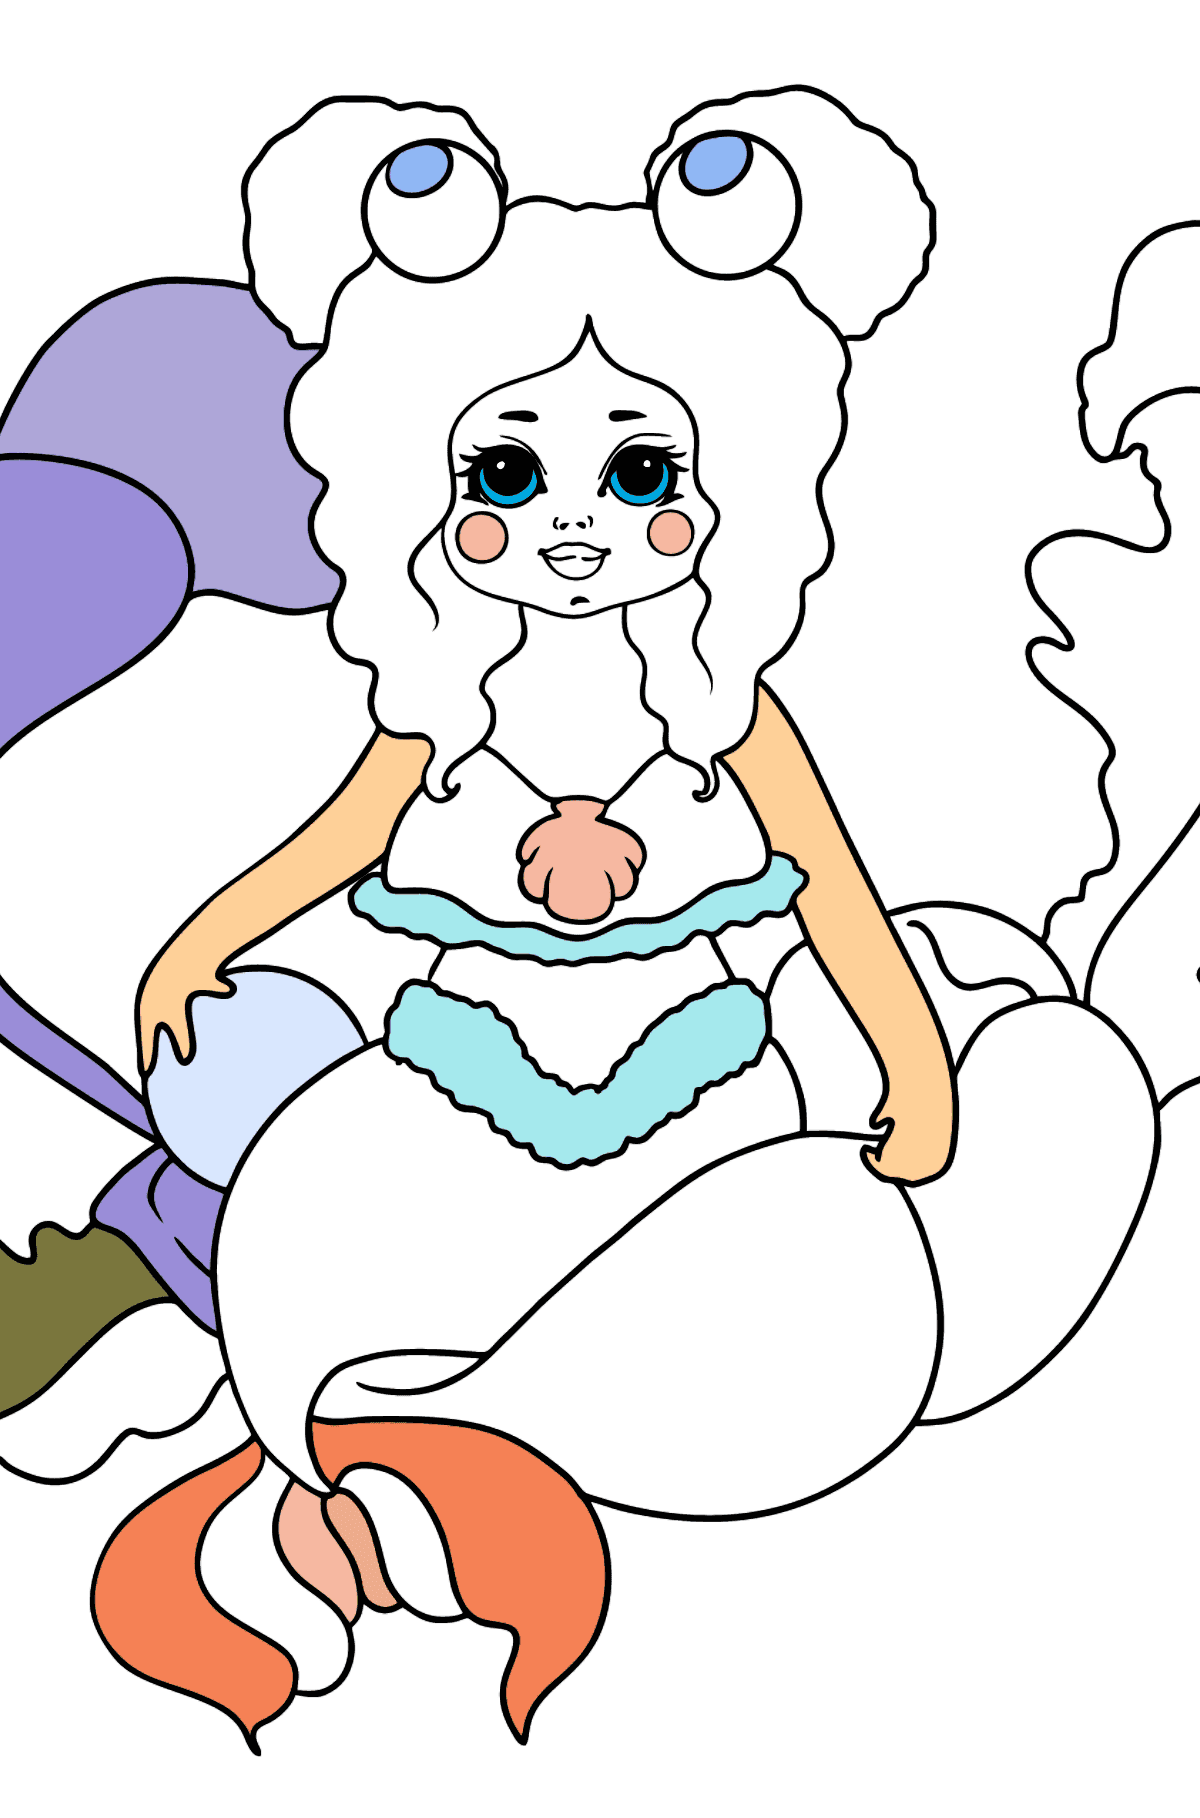 Mermaid is Resting coloring page - Coloring Pages for Kids